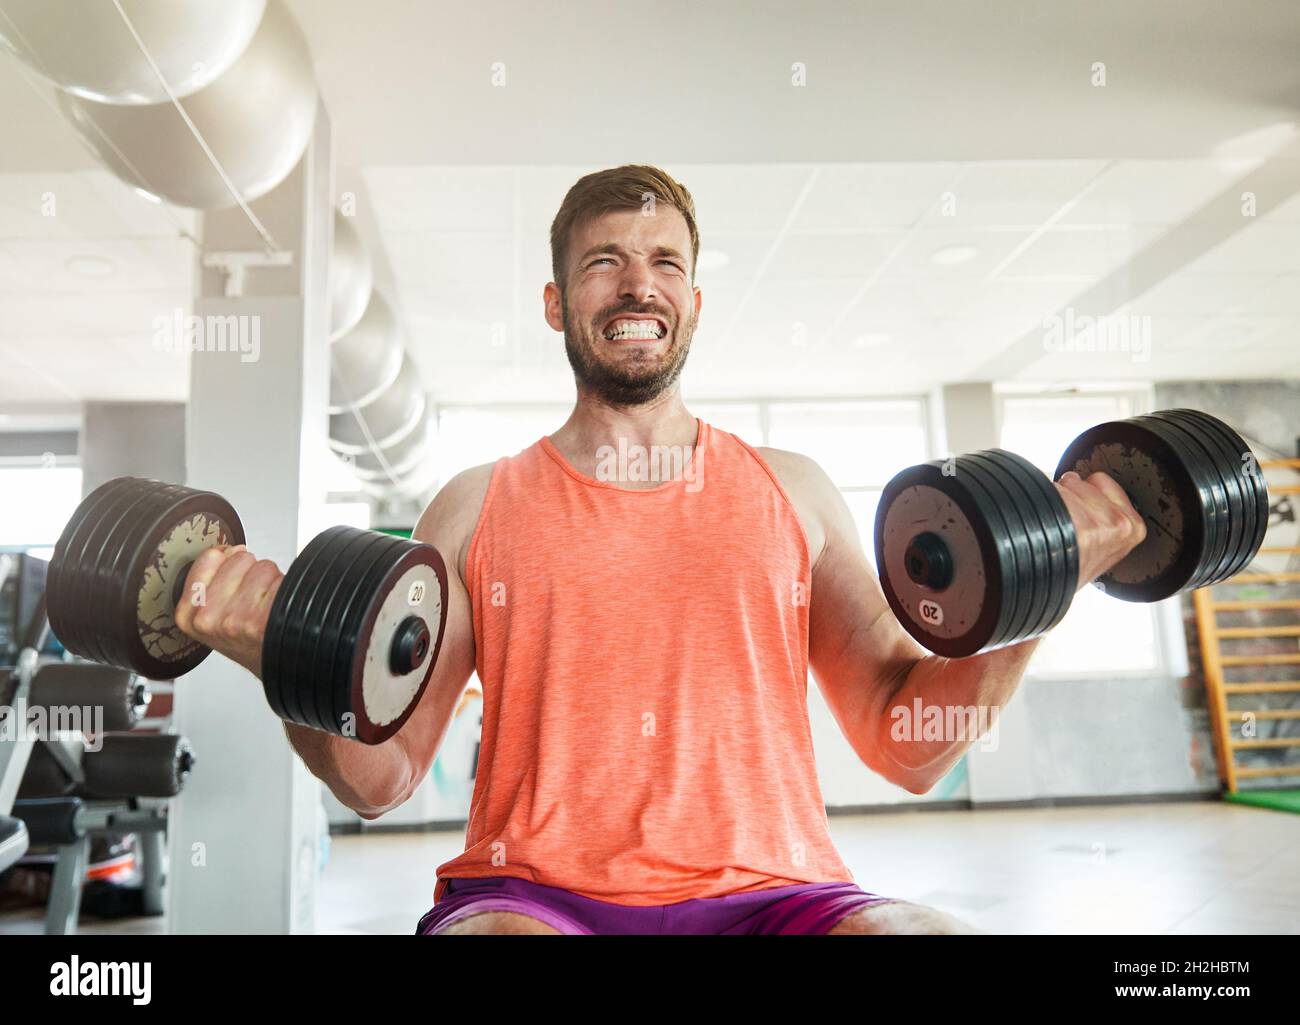 gym sport fitness exercise lifestyle athlete health training weight lifting strength body workout man Stock Photo